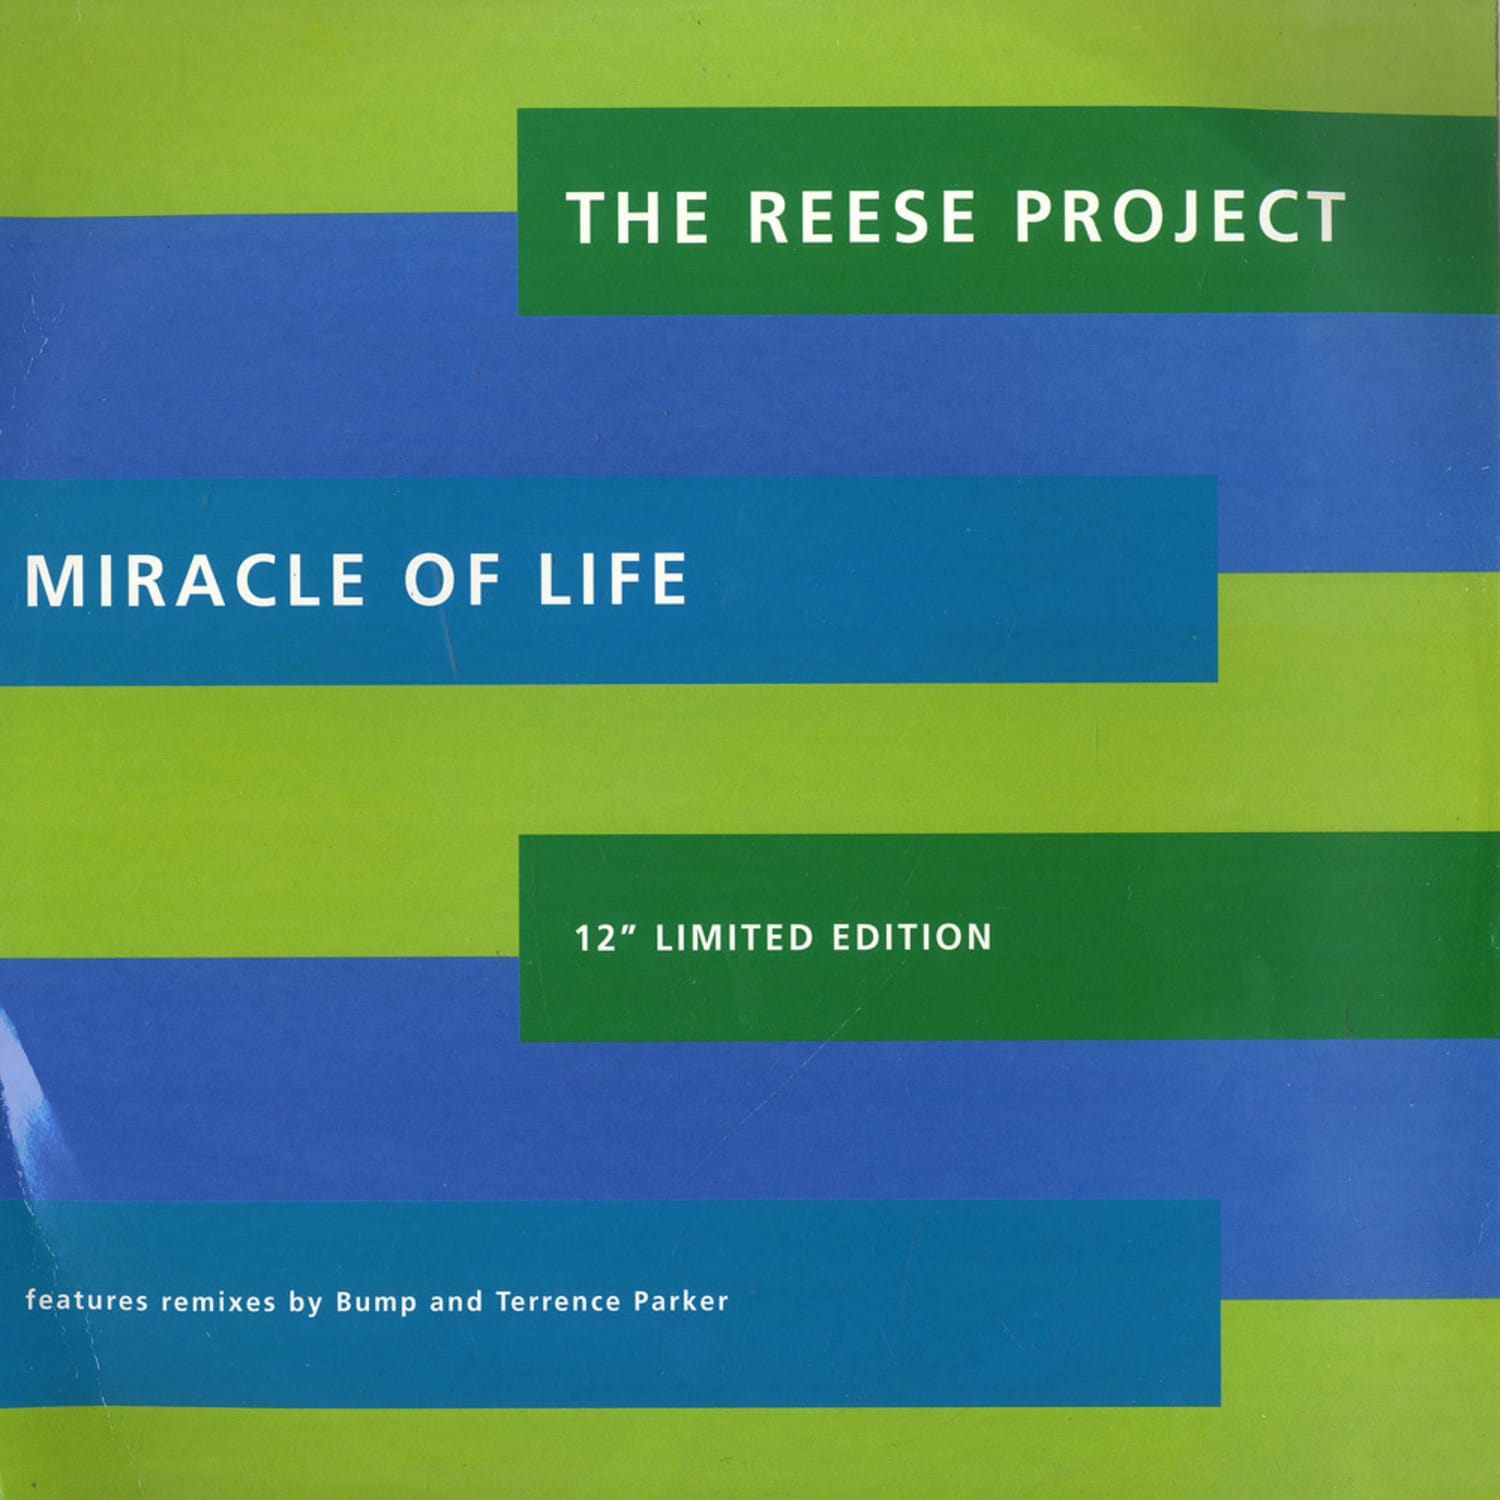 The Reese Project - MIRACLE OF LIFE